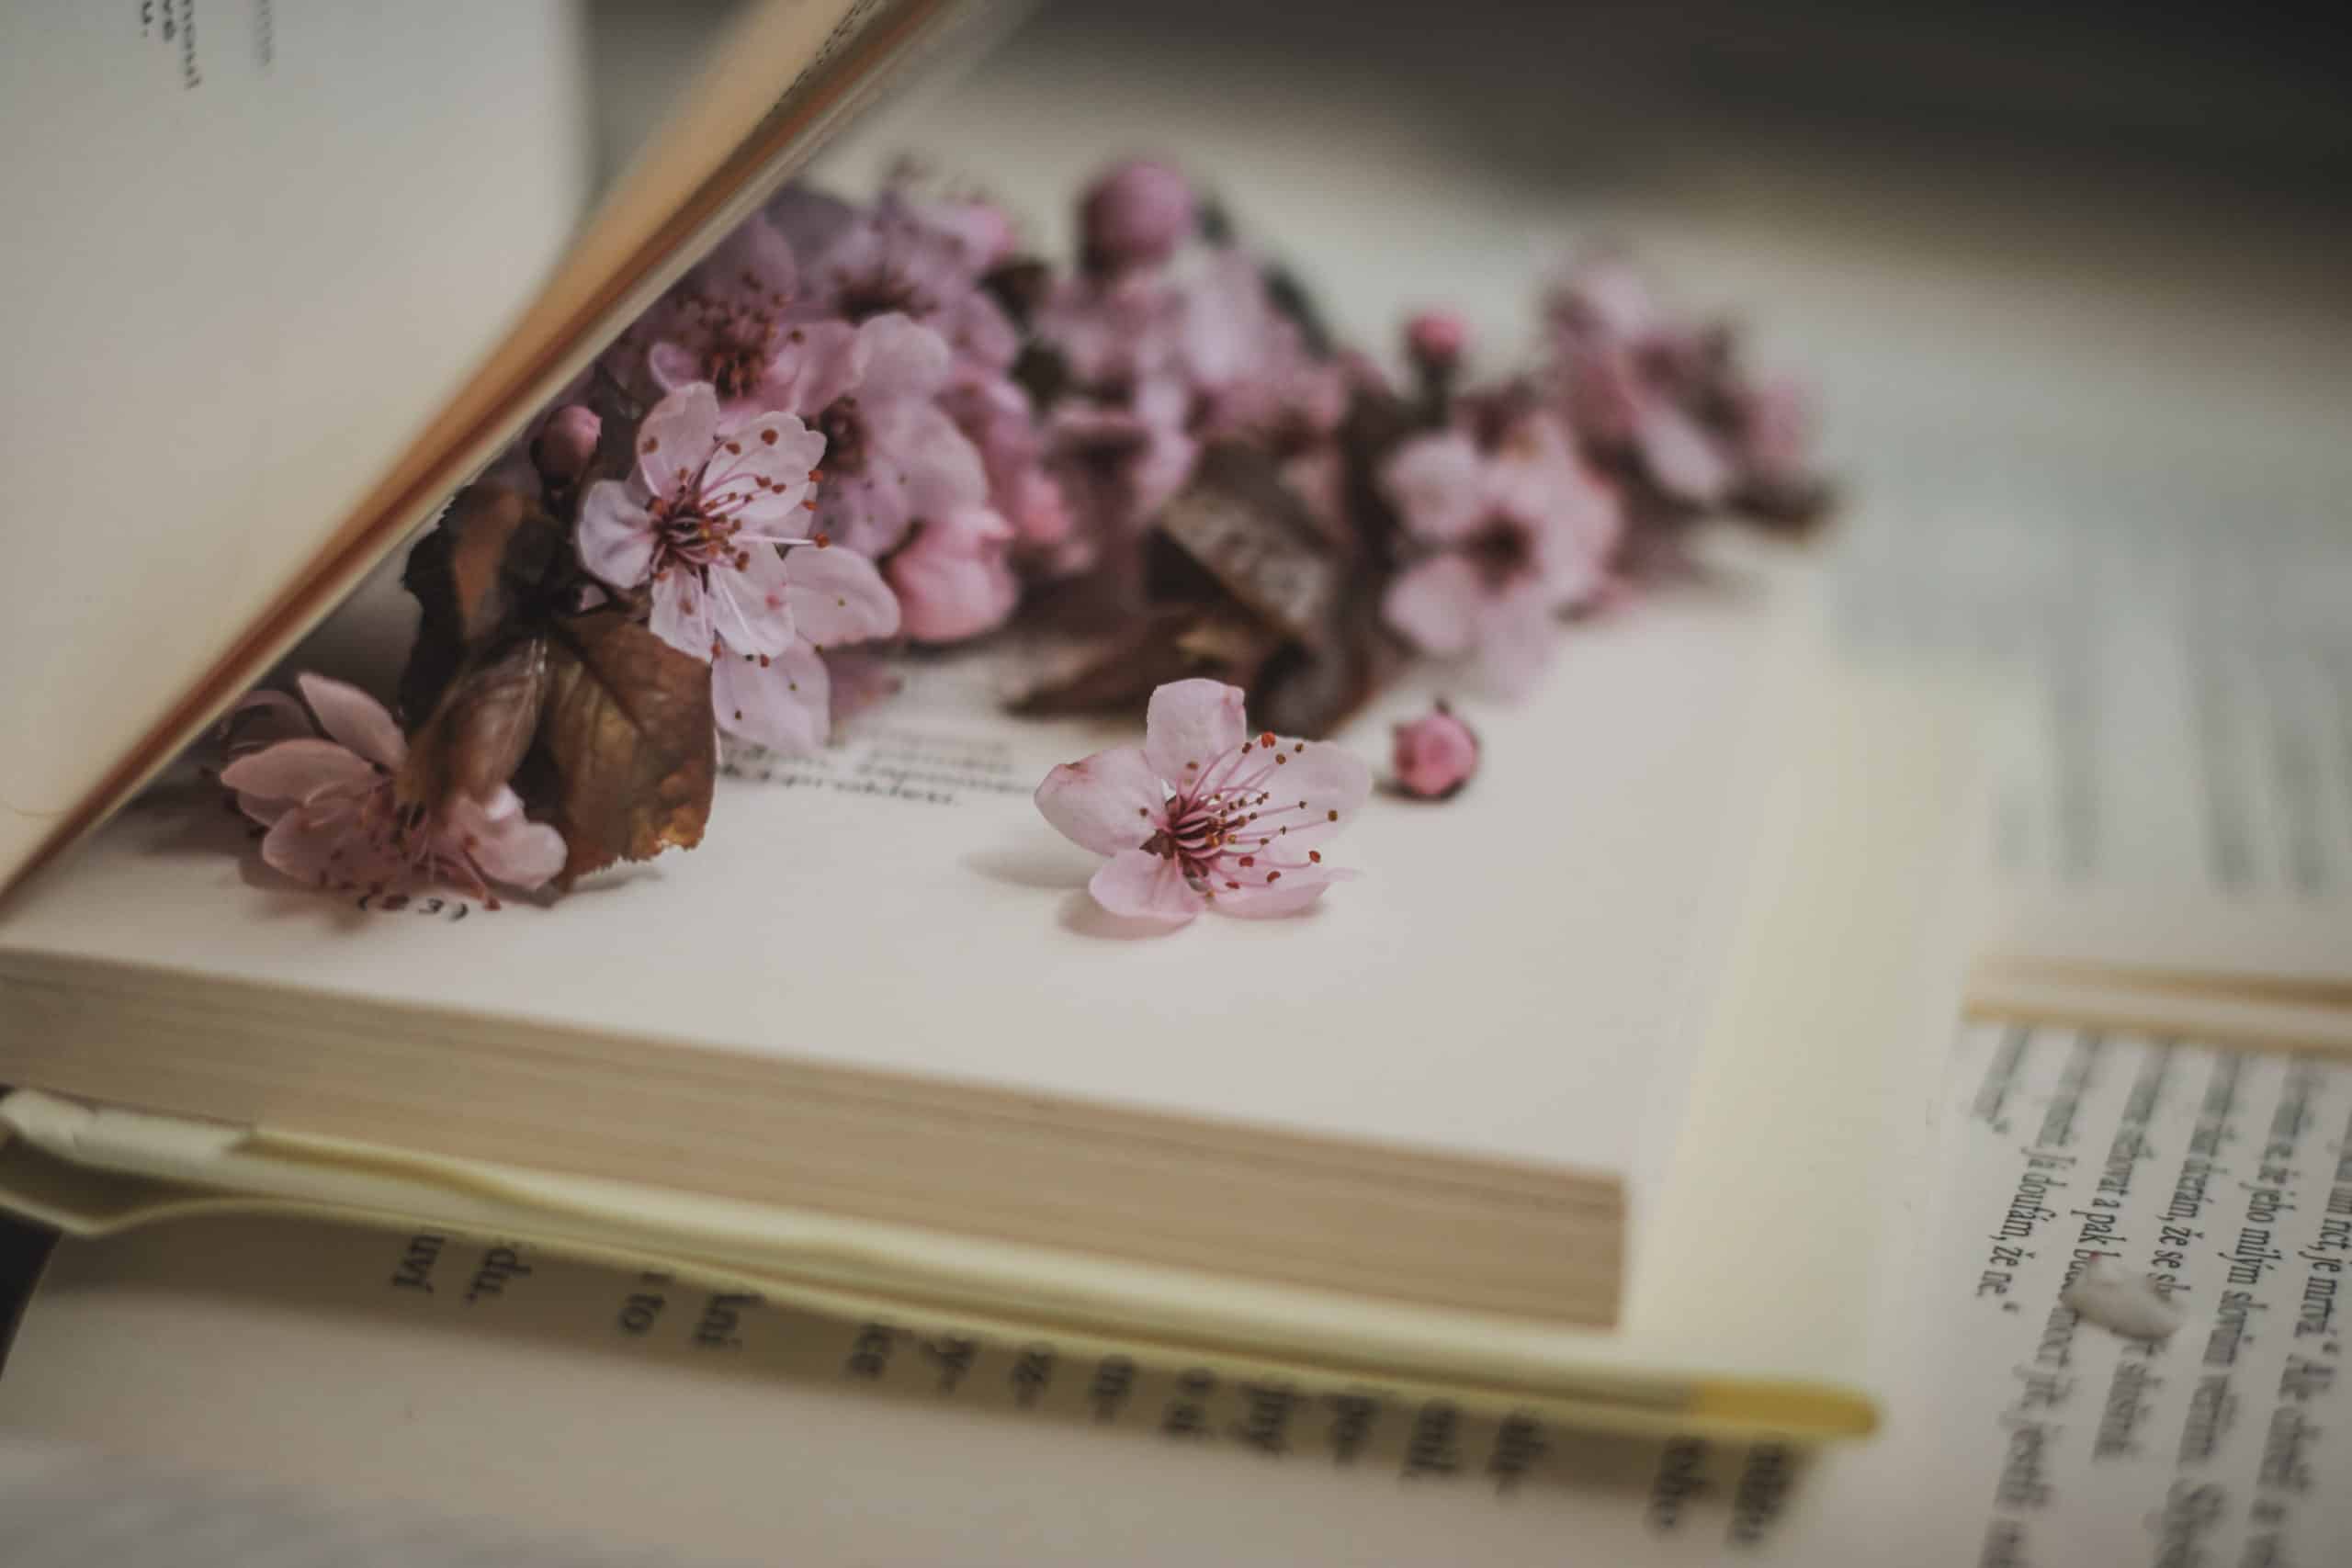 Open poetry book and flowers